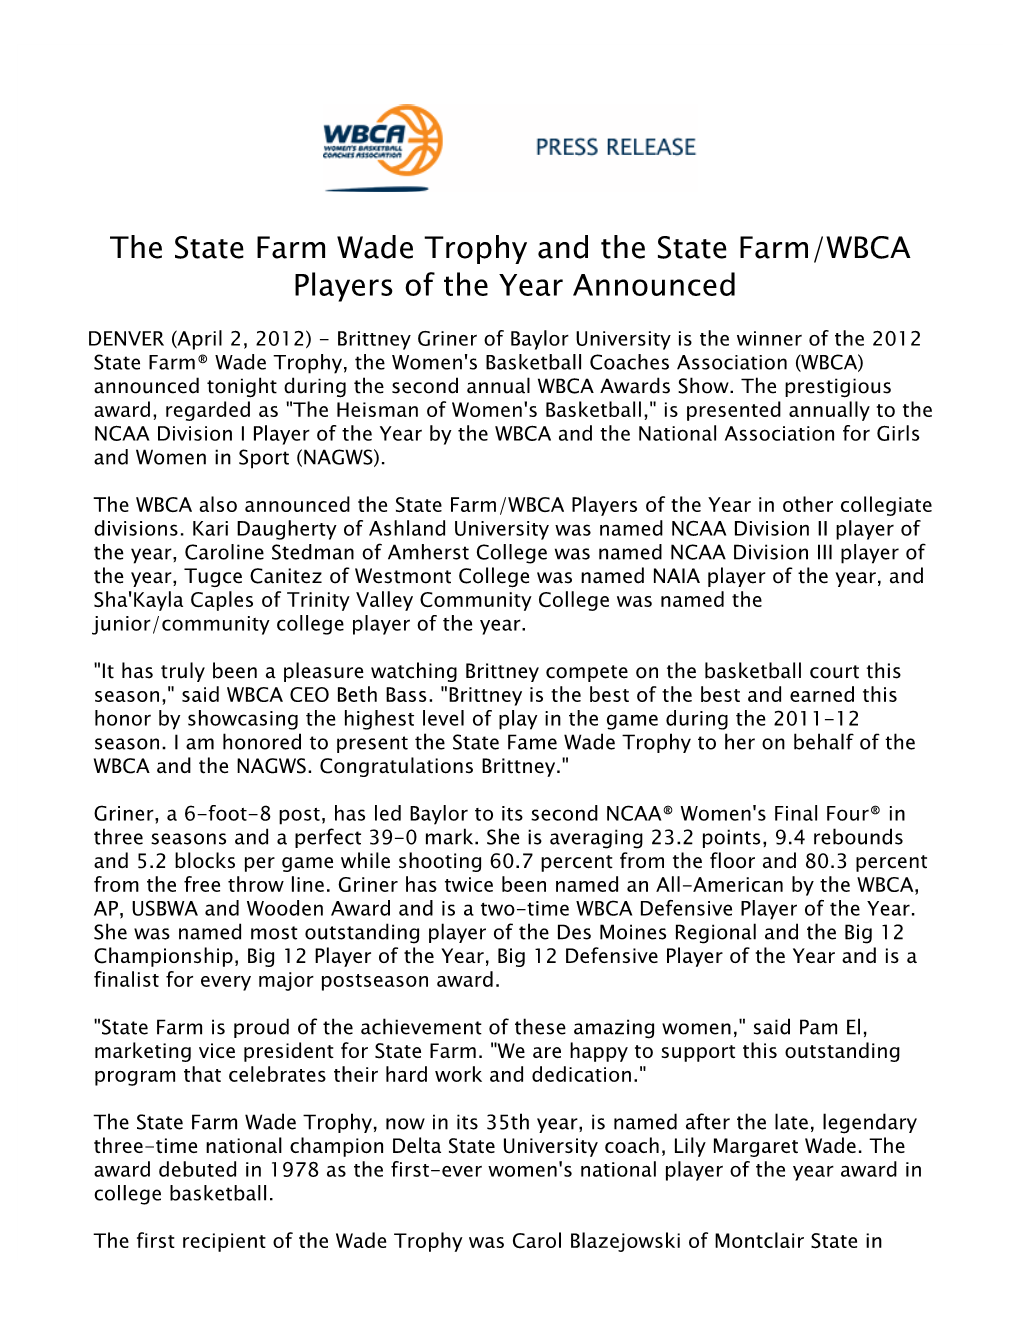 The State Farm Wade Trophy and the State Farm/WBCA Players of the Year Announced